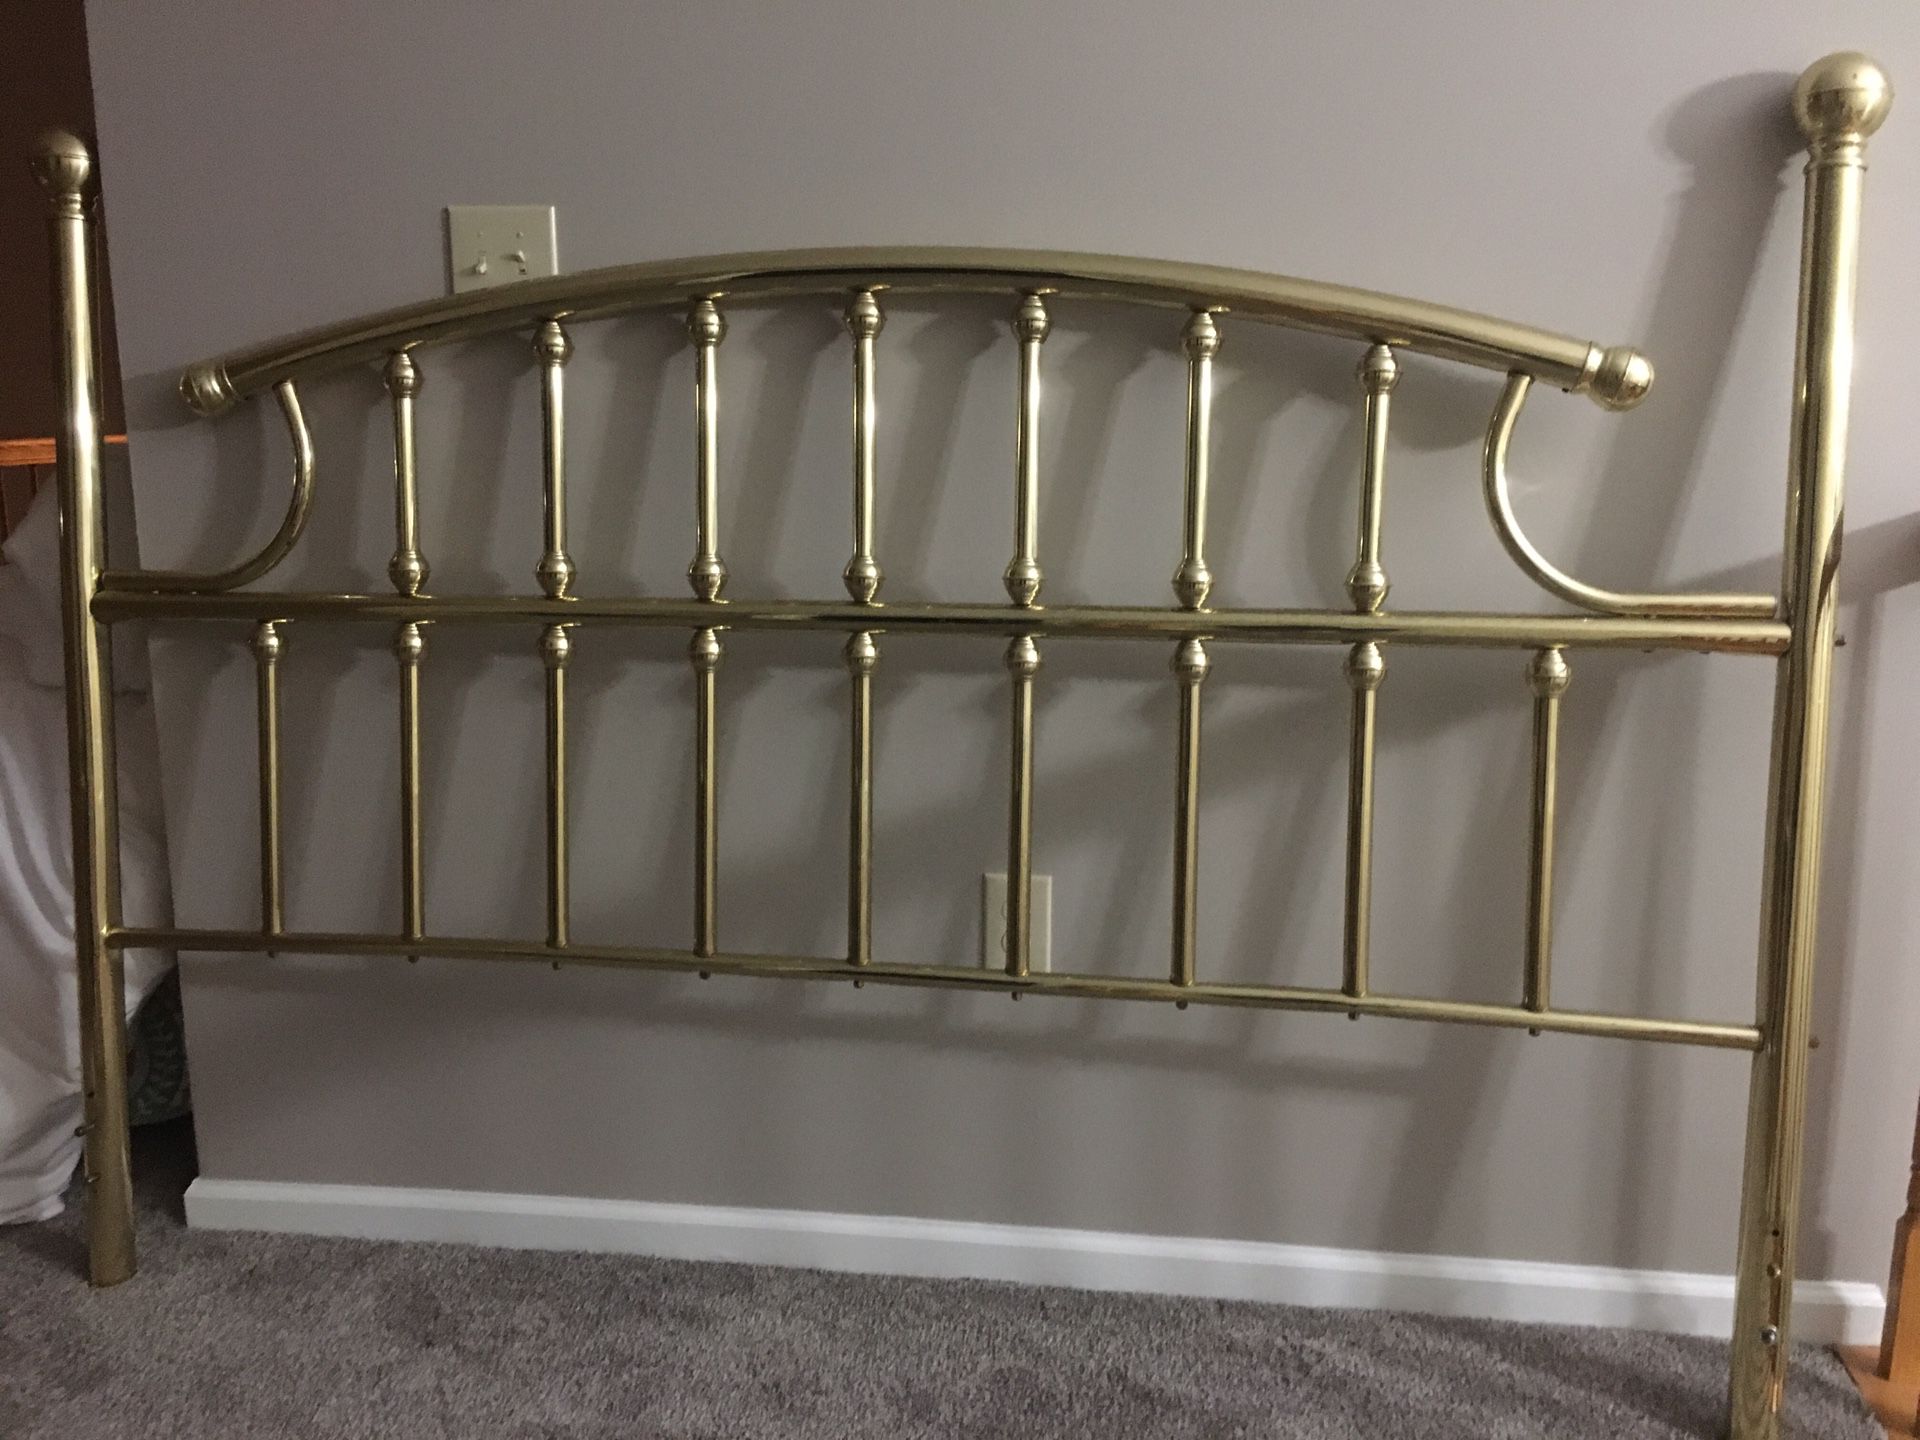 Brass/Gold headboard and metal bed frame for king size bed